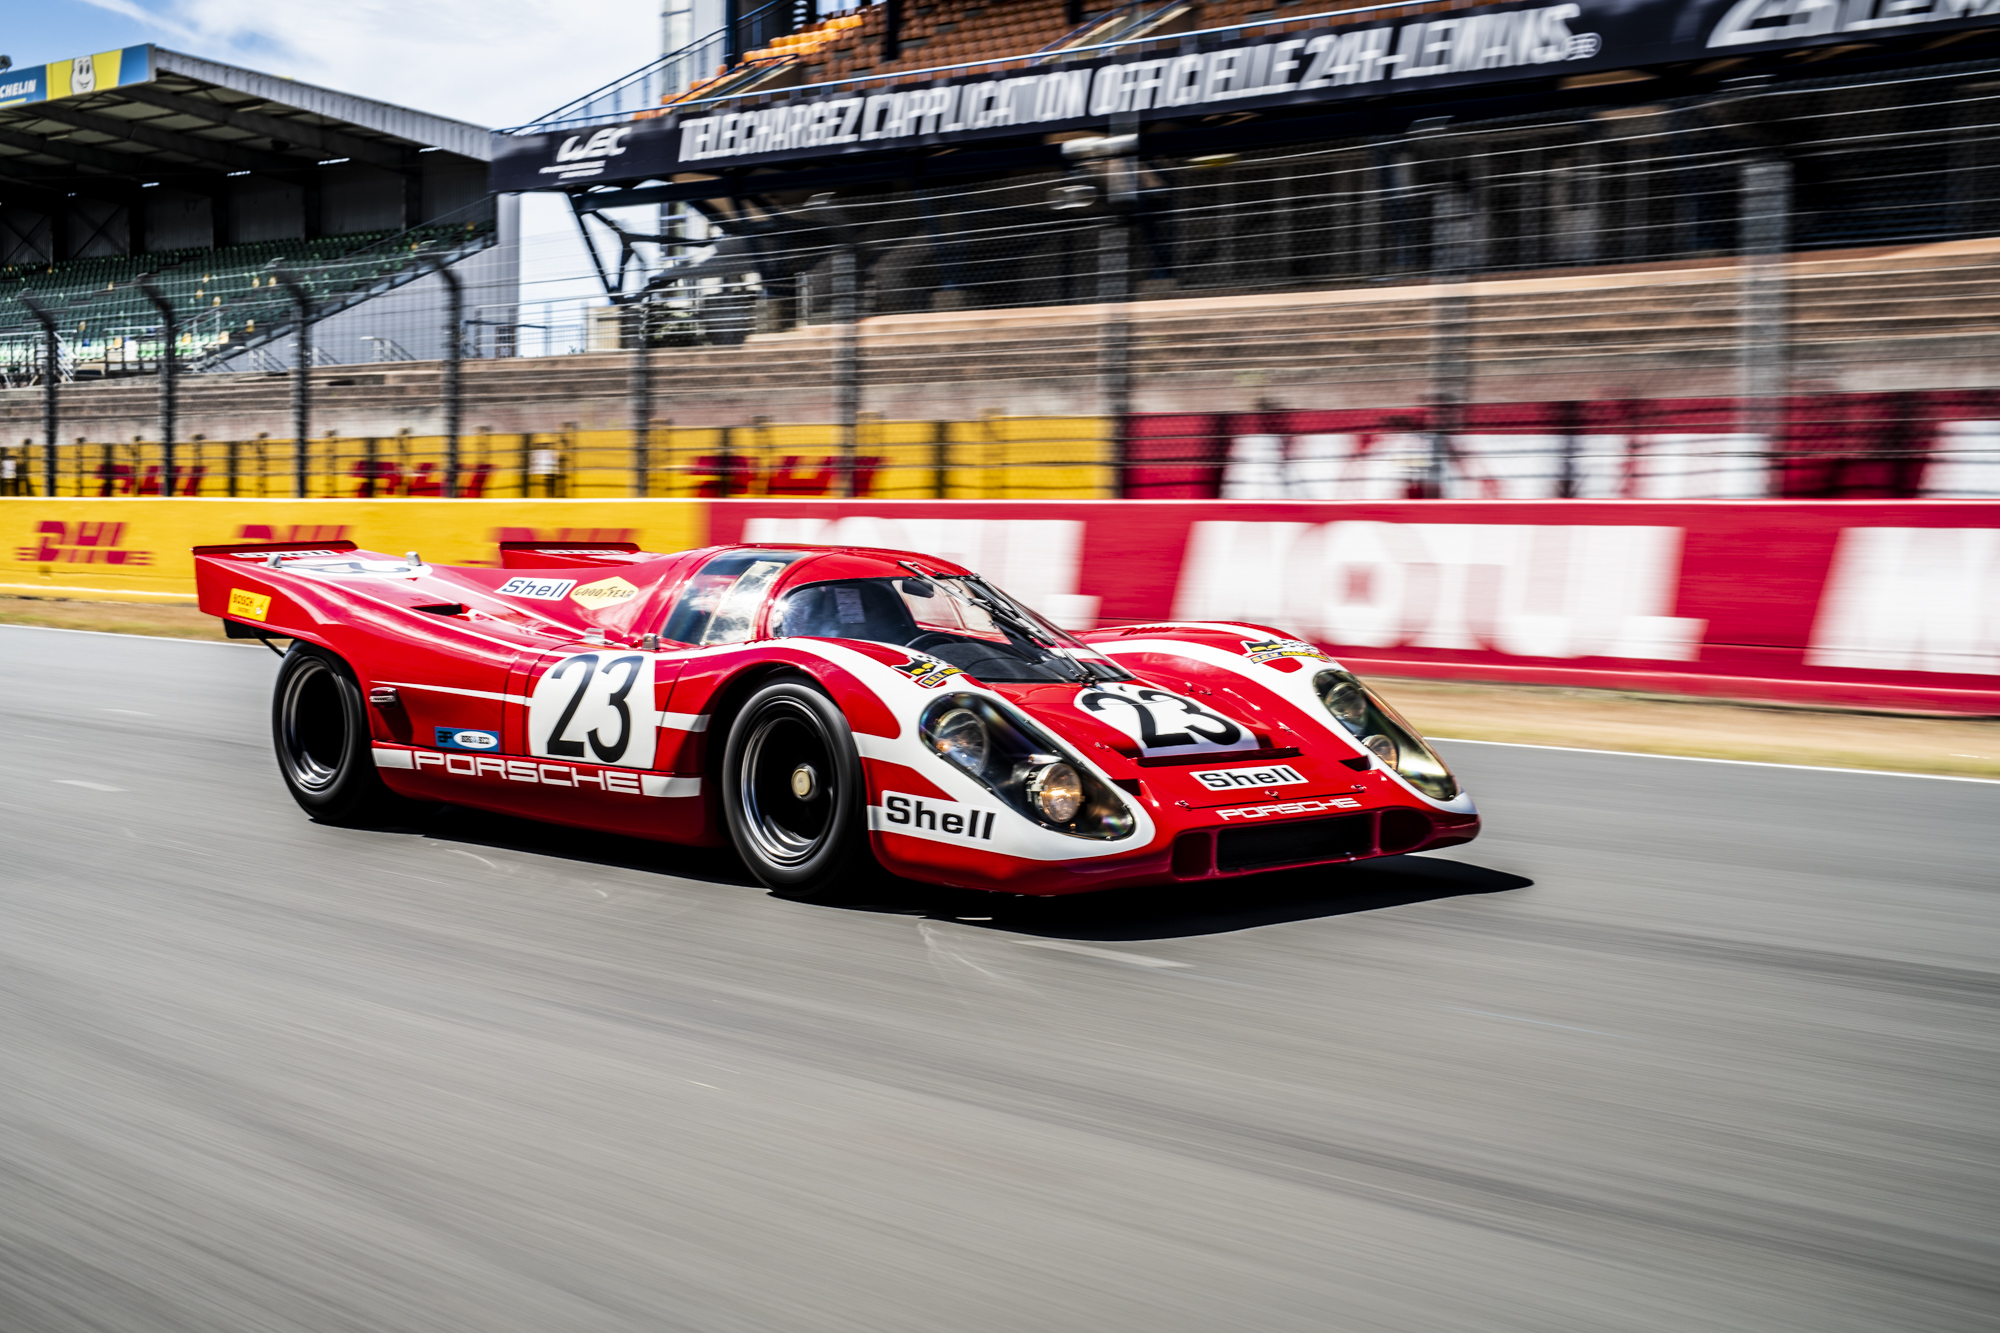 Red, white and black Porsche 917 at Le Mans